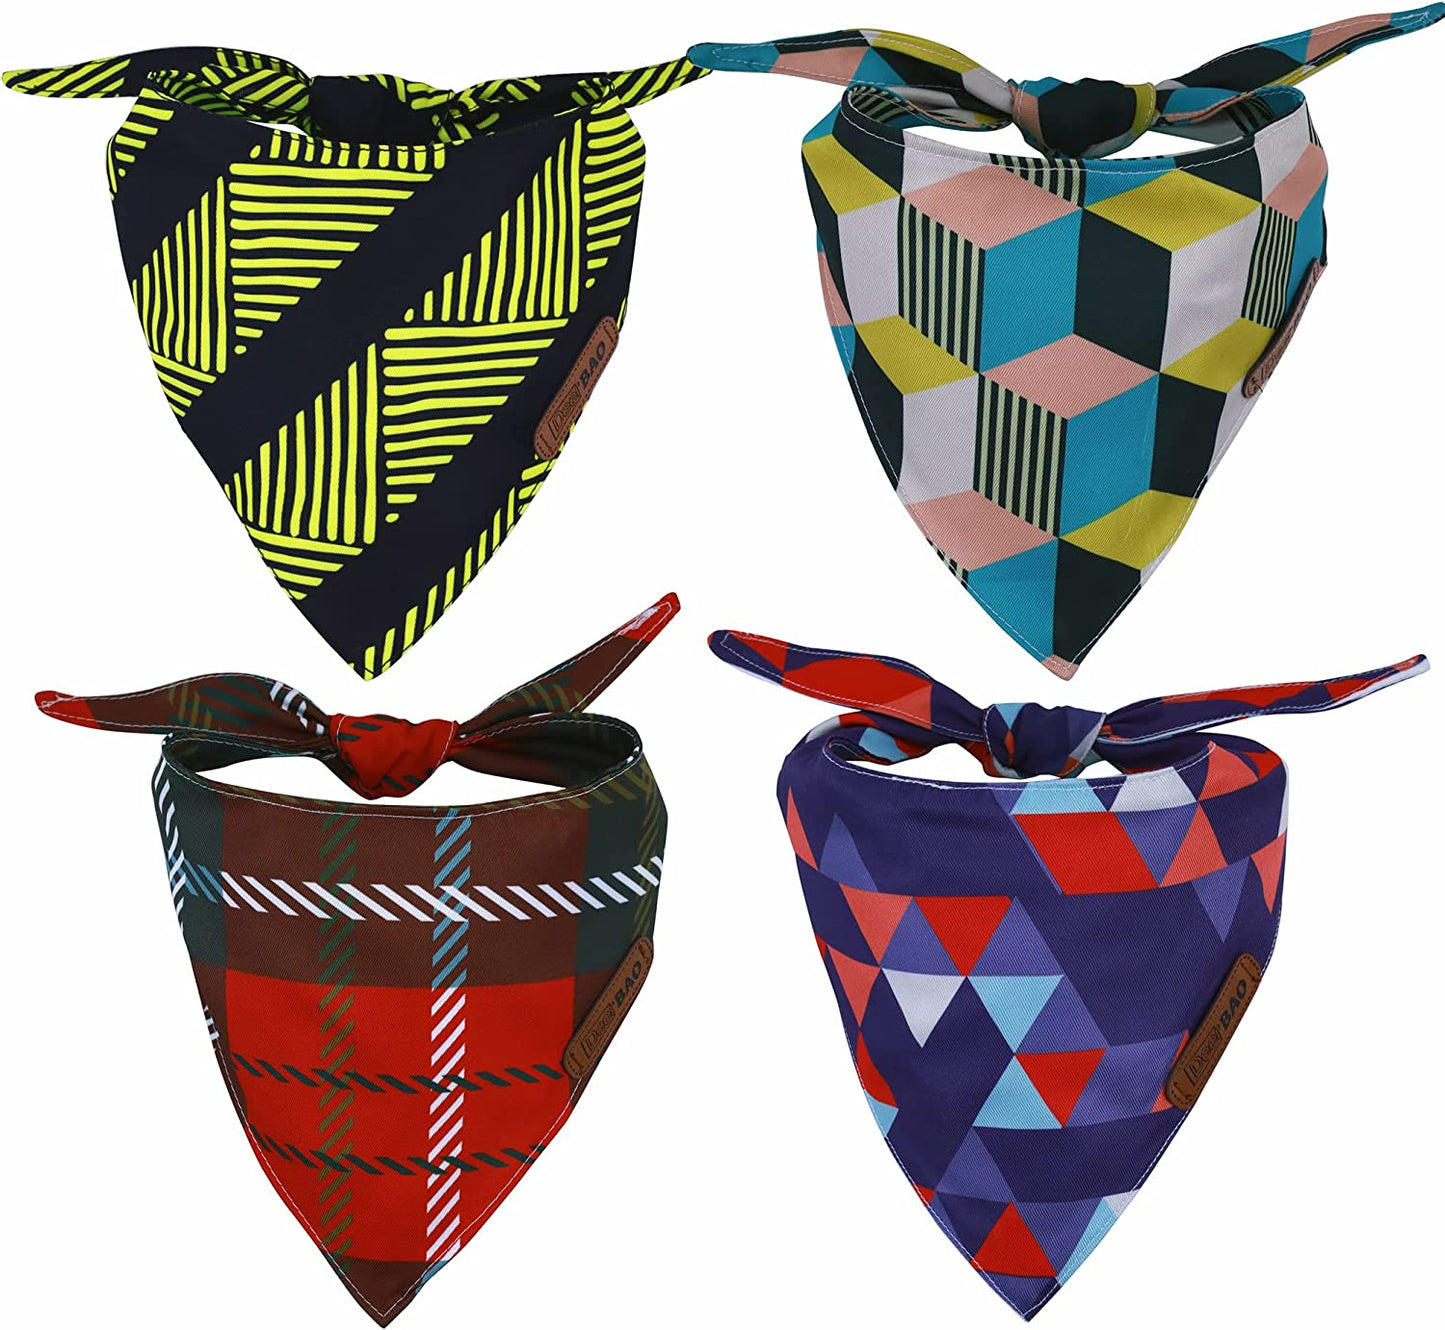 Deerbao Dog Bandanas 4Pack,Dog Scarf,Dog Bandanas Boygirl,Premium Durable Fabric,Adjustable Fit,Unique Shape,Suitable for All Kinds of Dogs,Provide Various Sizes (Large, Classic Plaid)